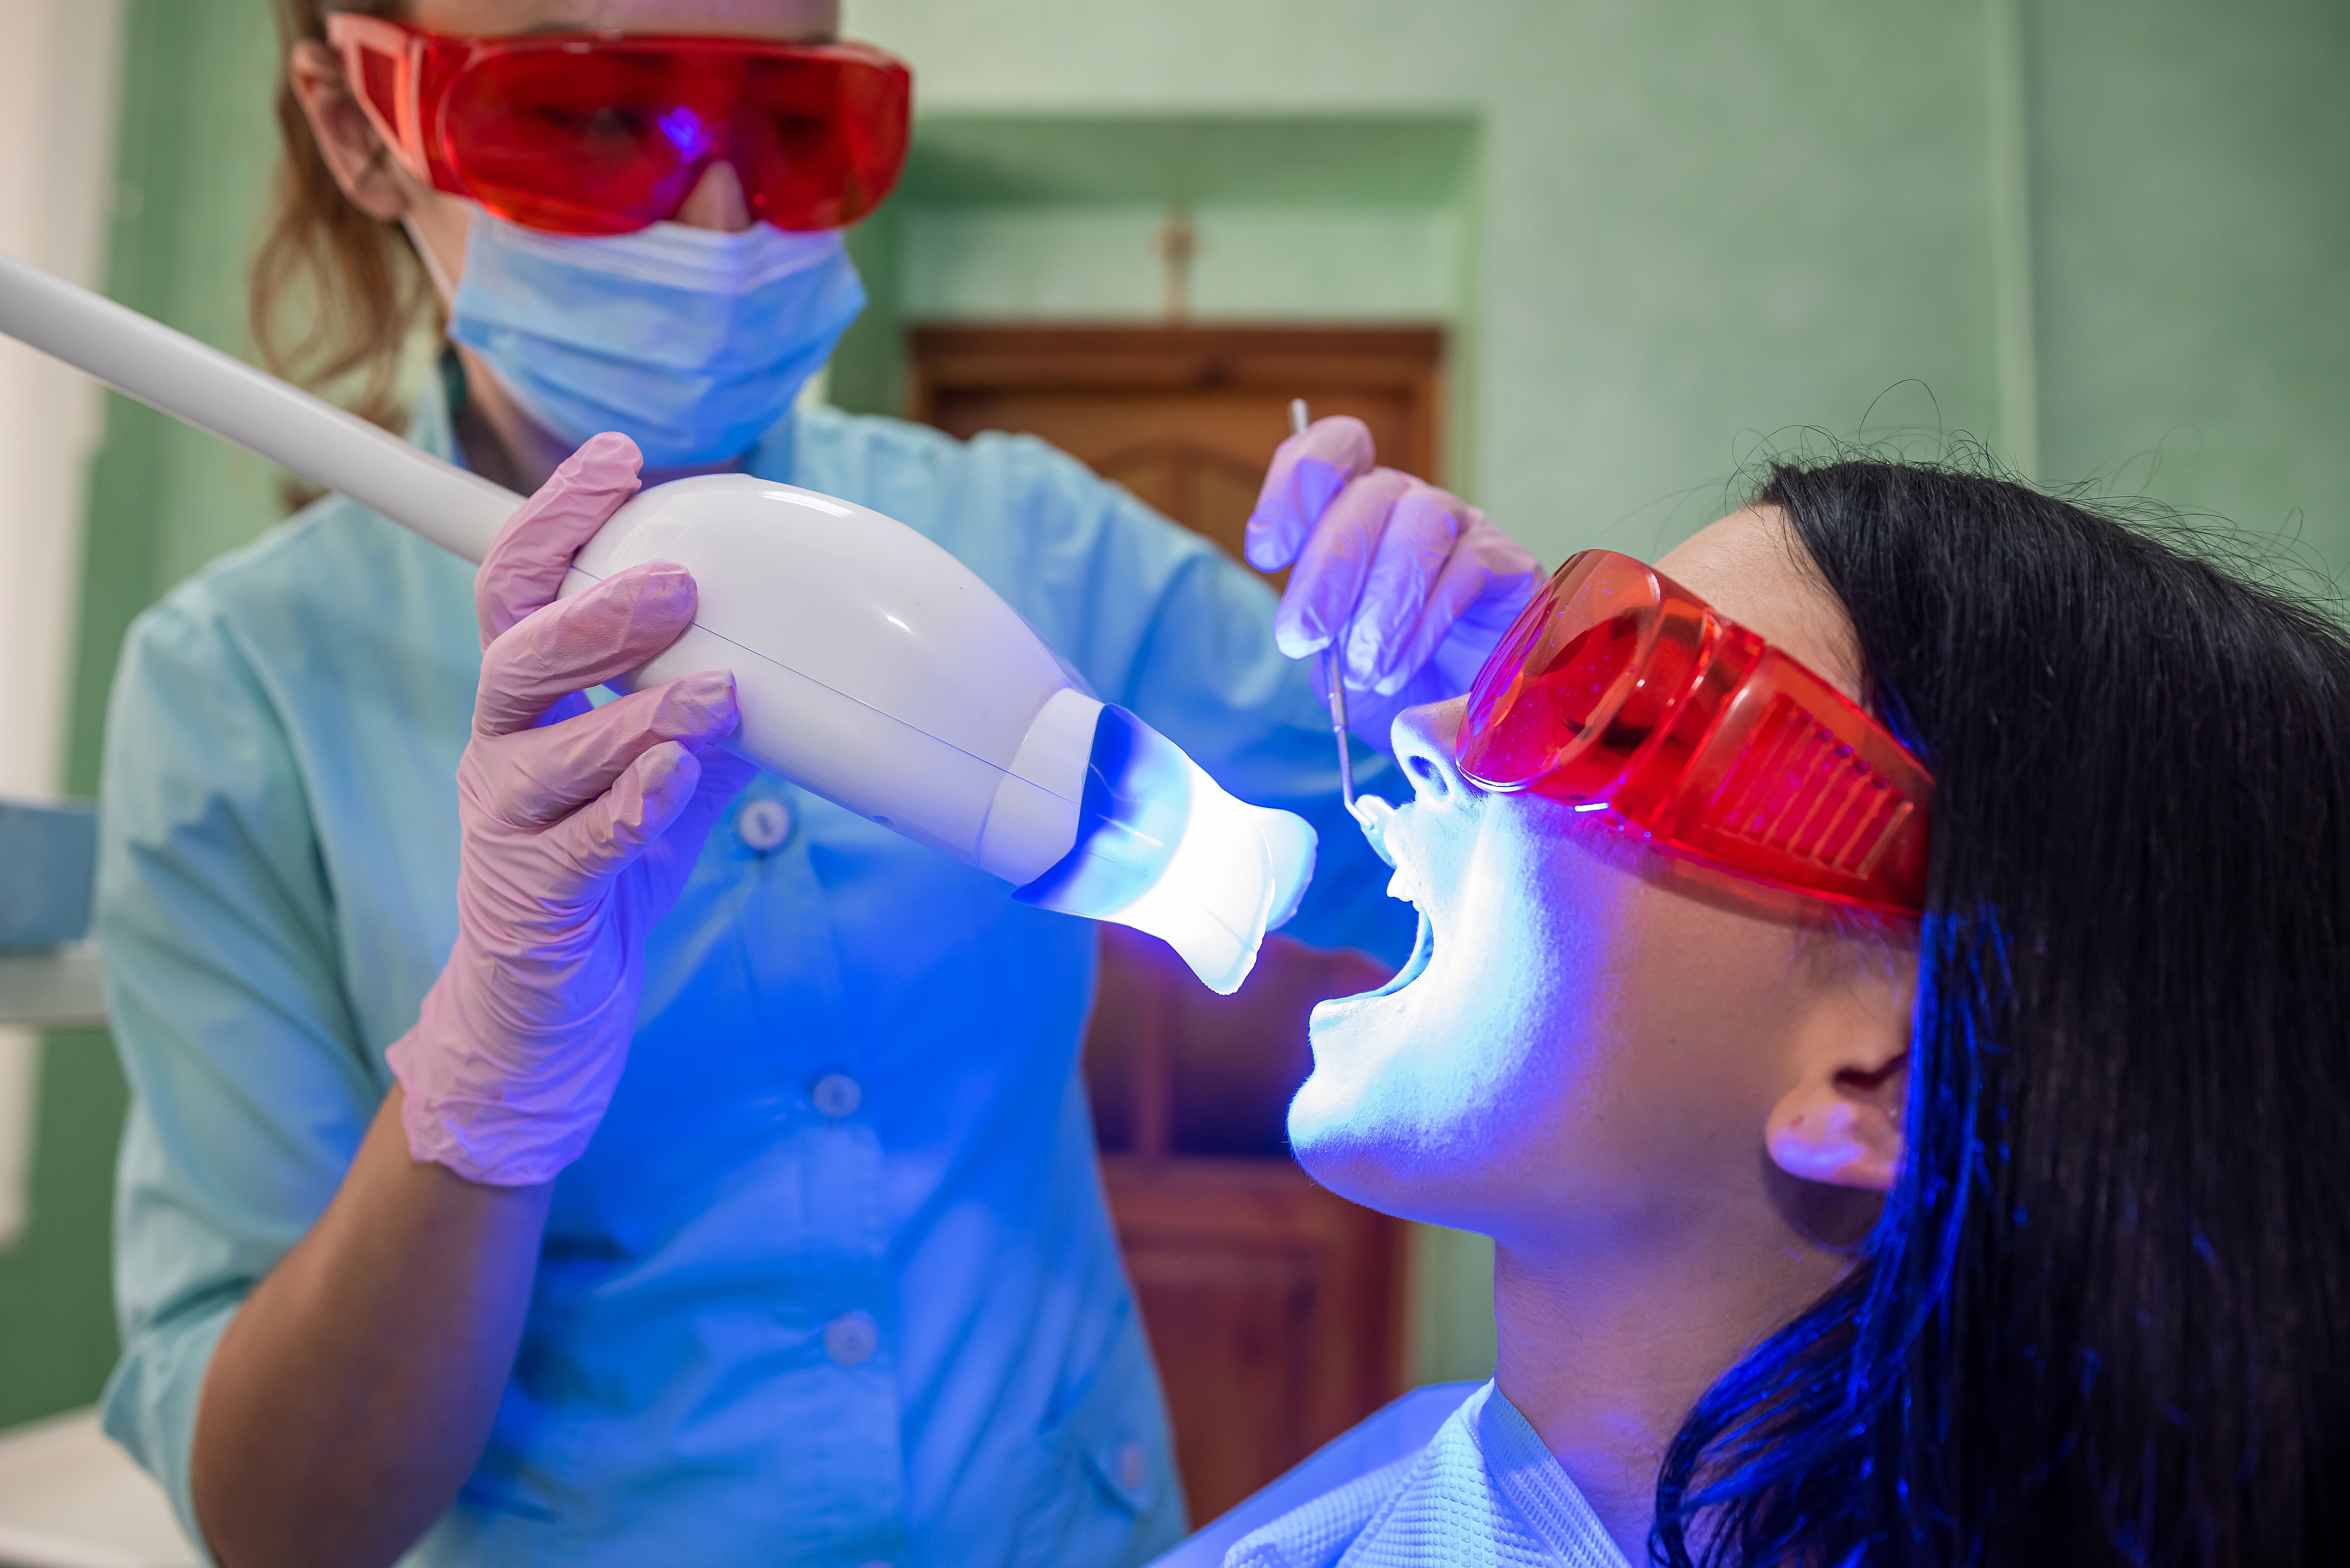 doctor-with-lamp-mirror-treating-patients-teeth-close-up.jpg